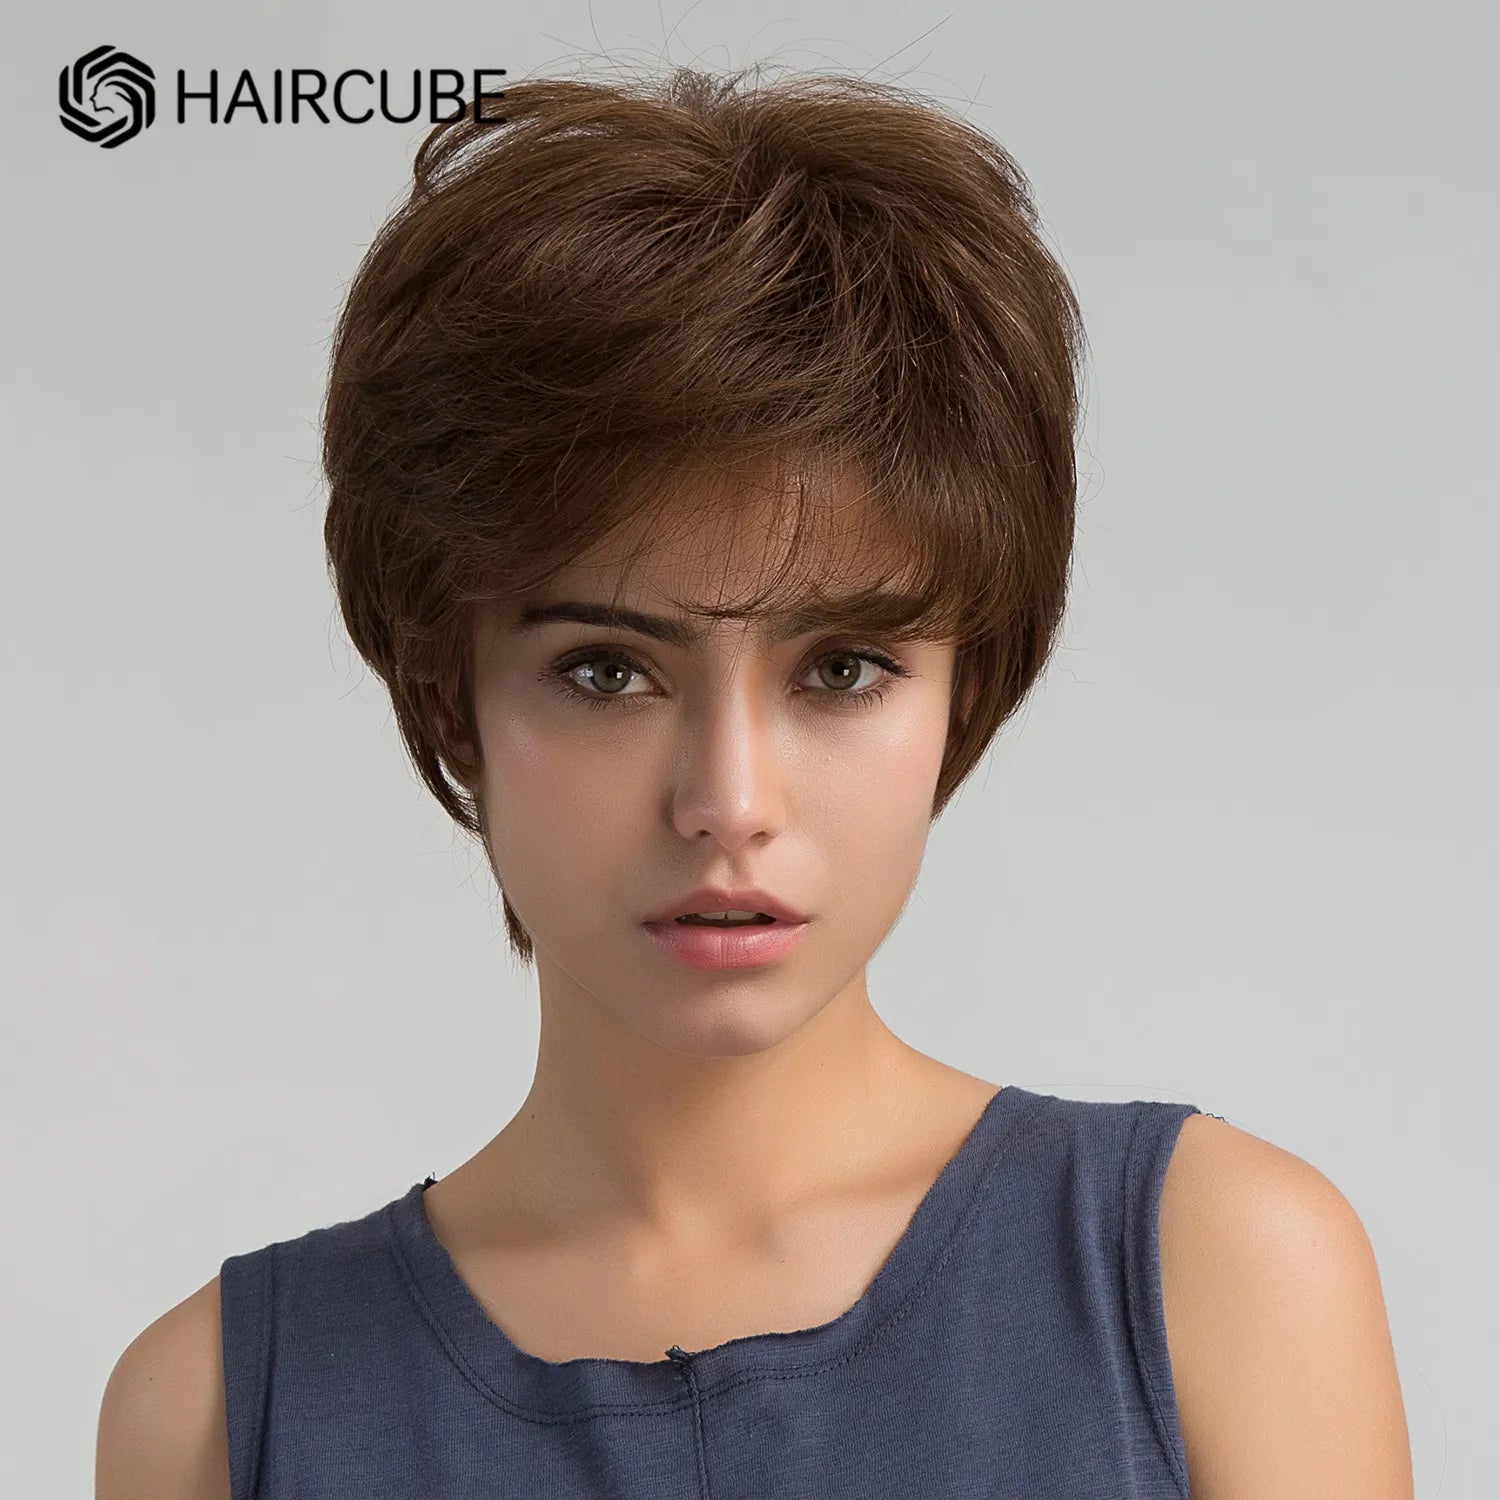 HAIRCUBE Short Chocolate Brown Human Hair Blend Wigs for Women Layered Pixie Cut Wig with Bang Natural Soft Heat Resistant Hair